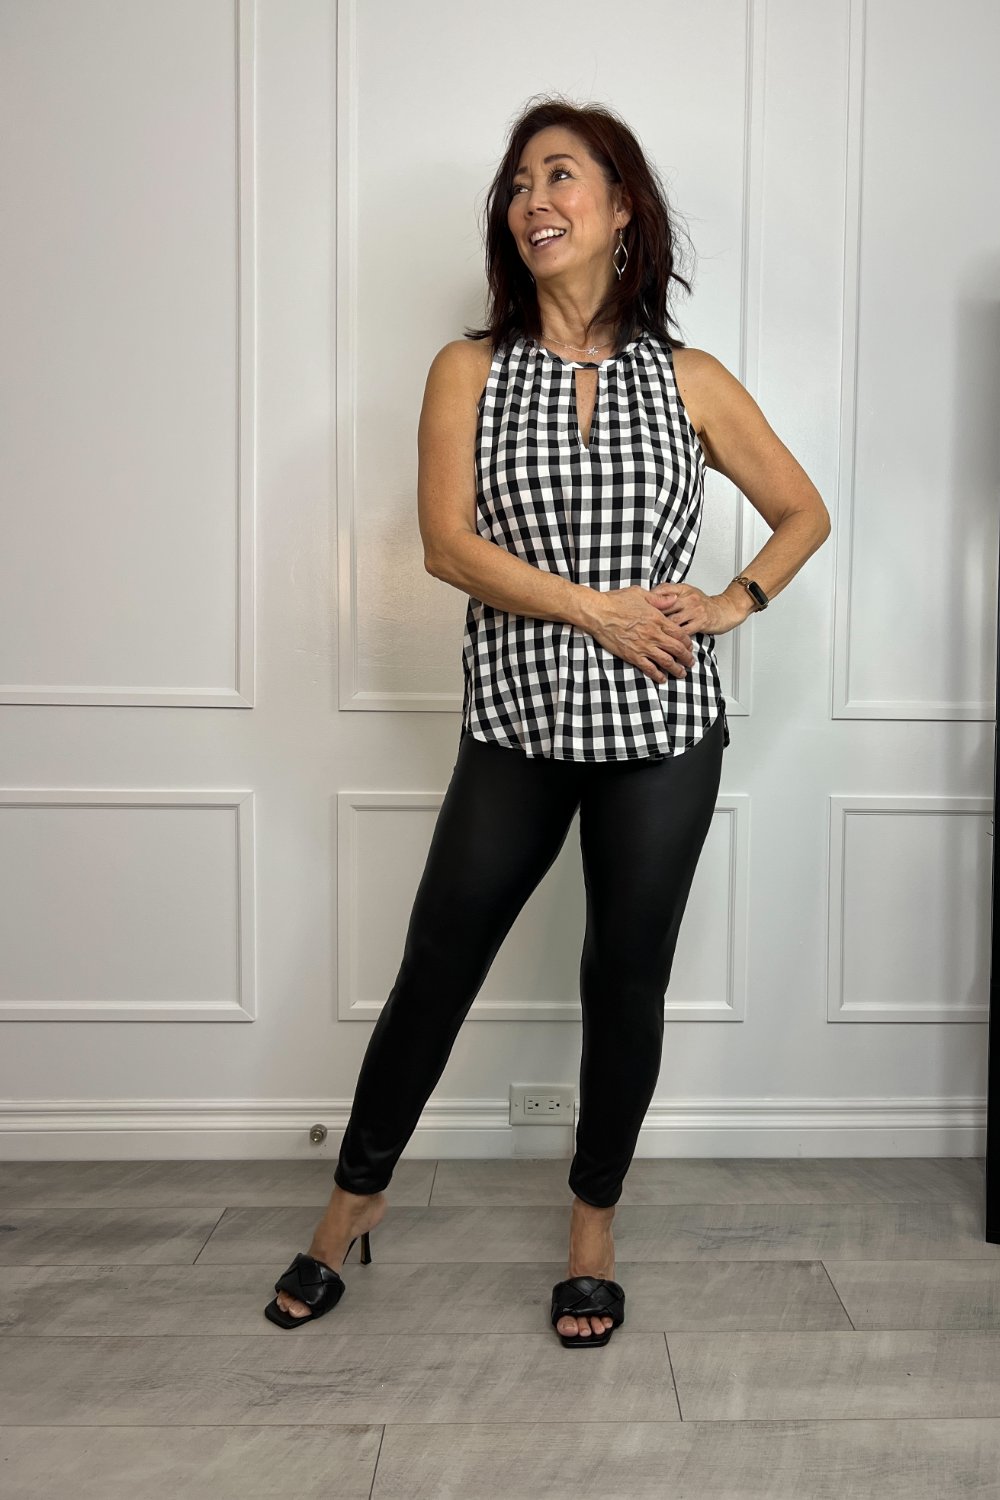 cool clothes for work on any hot summer day in black and white gingham